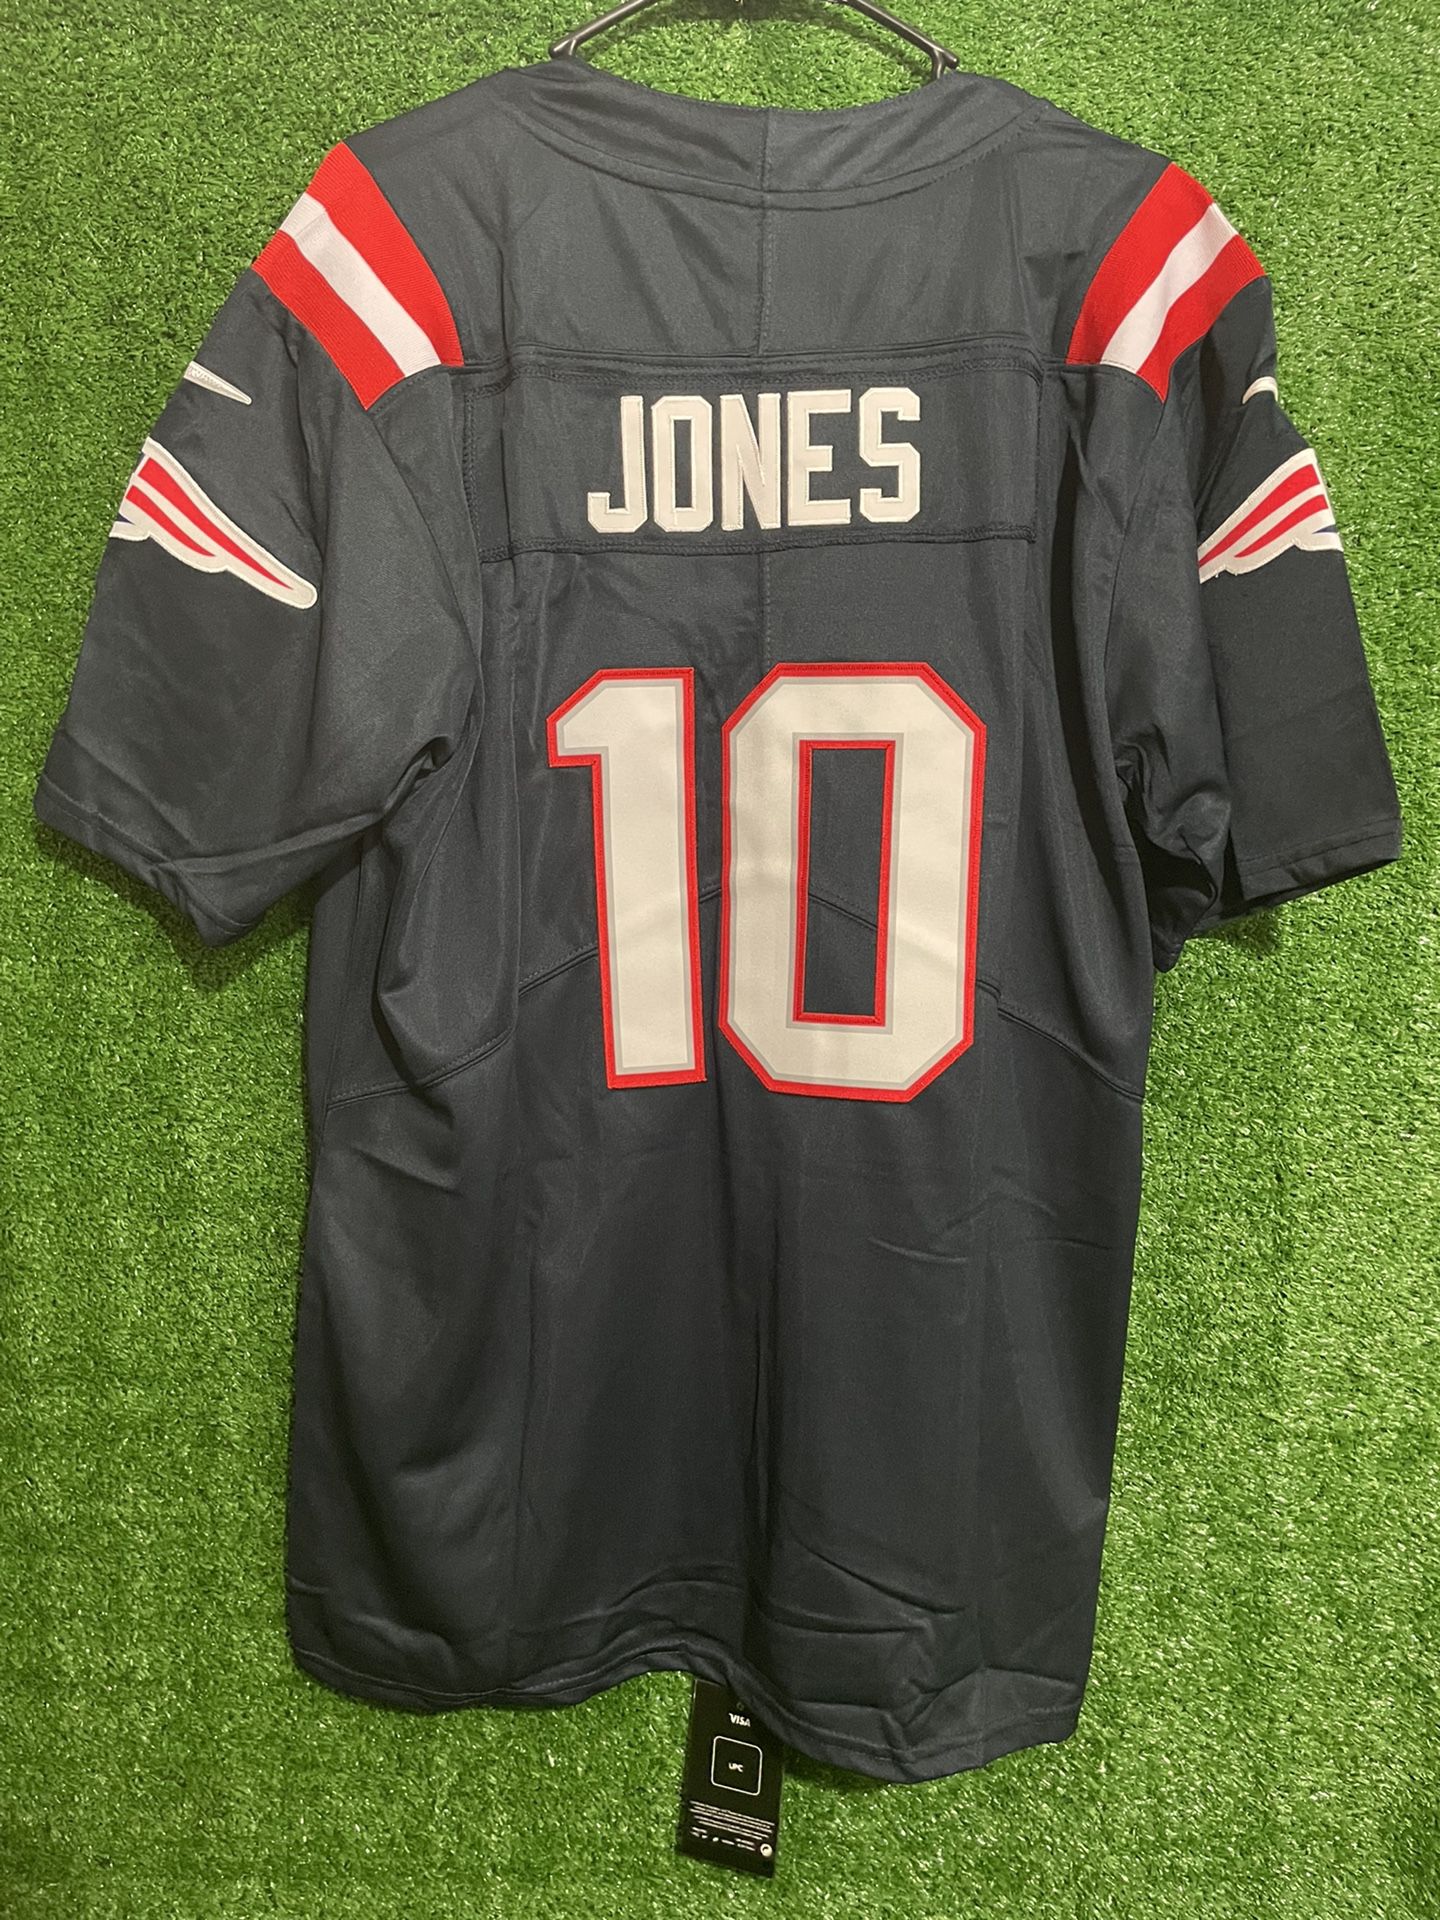 MAC JONES NEW ENGLAND PATRIOTS NIKE JERSEY BRAND NEW WITH TAGS SIZE LARGE